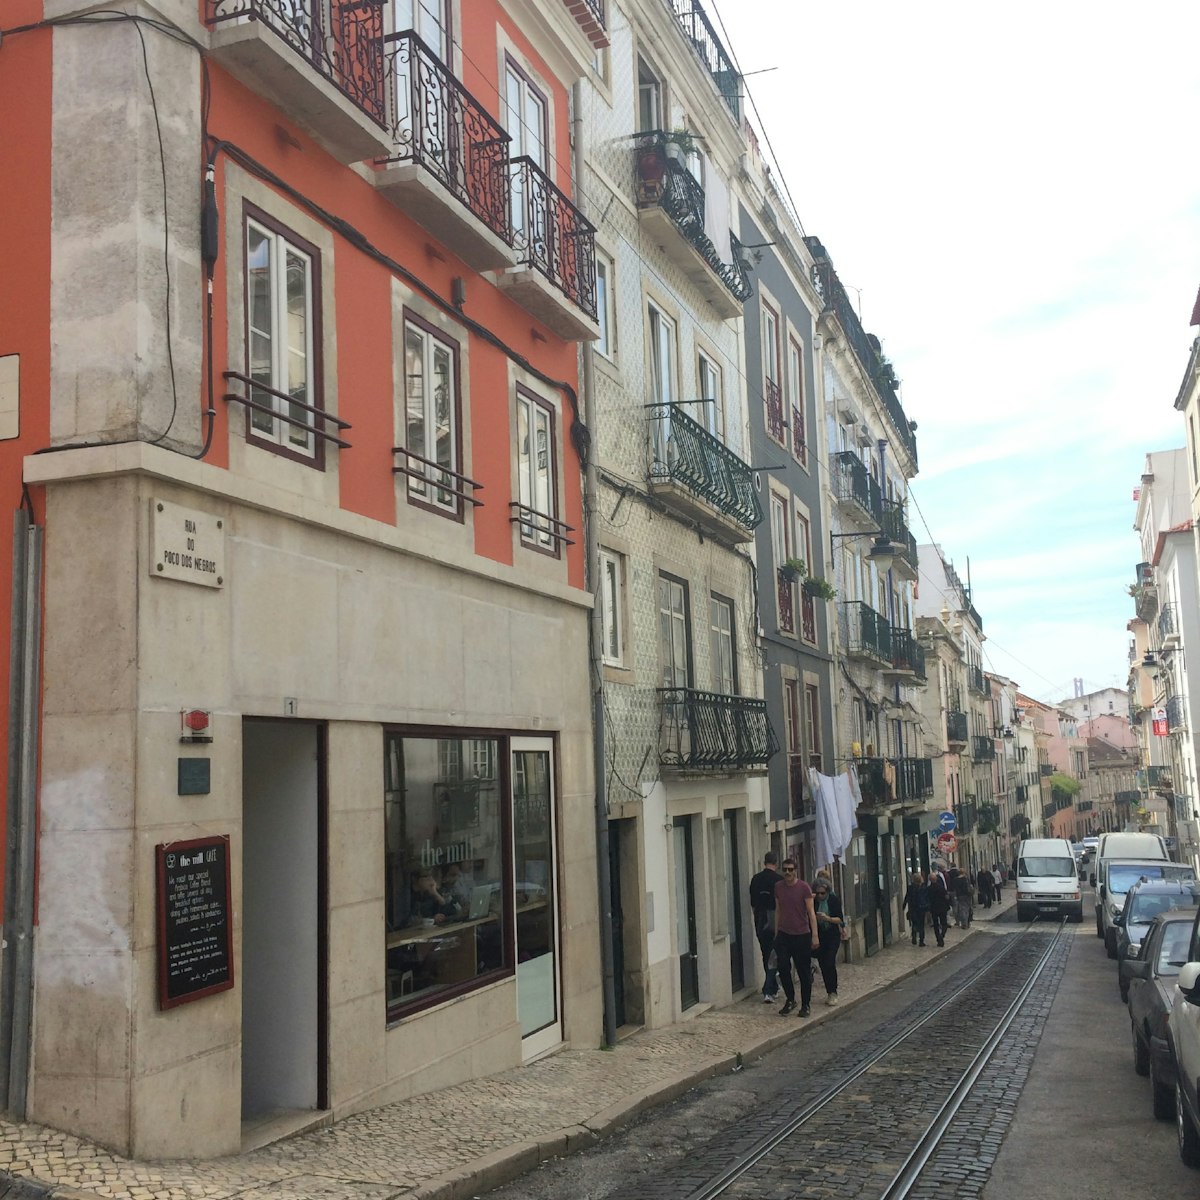 The border between Chiado and "The Triangle" is marked by cafe The Mill